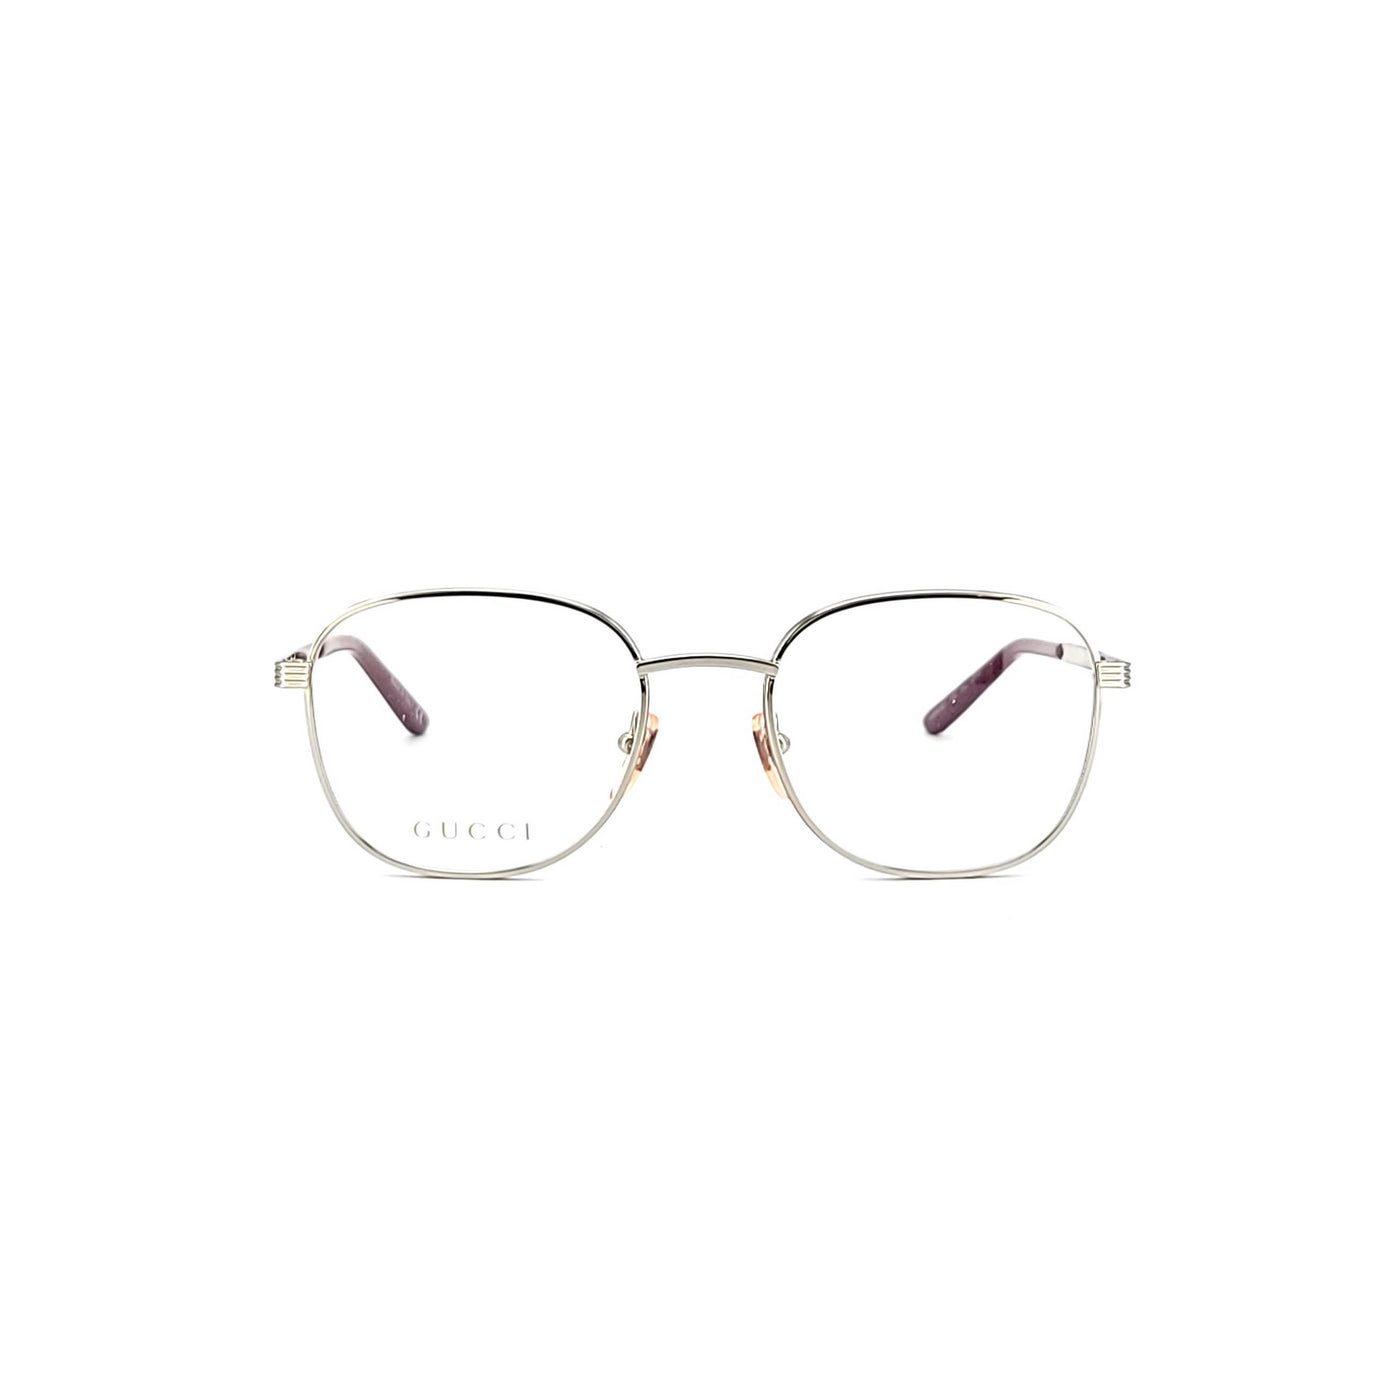 Gucci GG 0805O/002 | Eyeglasses with FREE Anti Radiation Lenses - Vision Express Optical Philippines